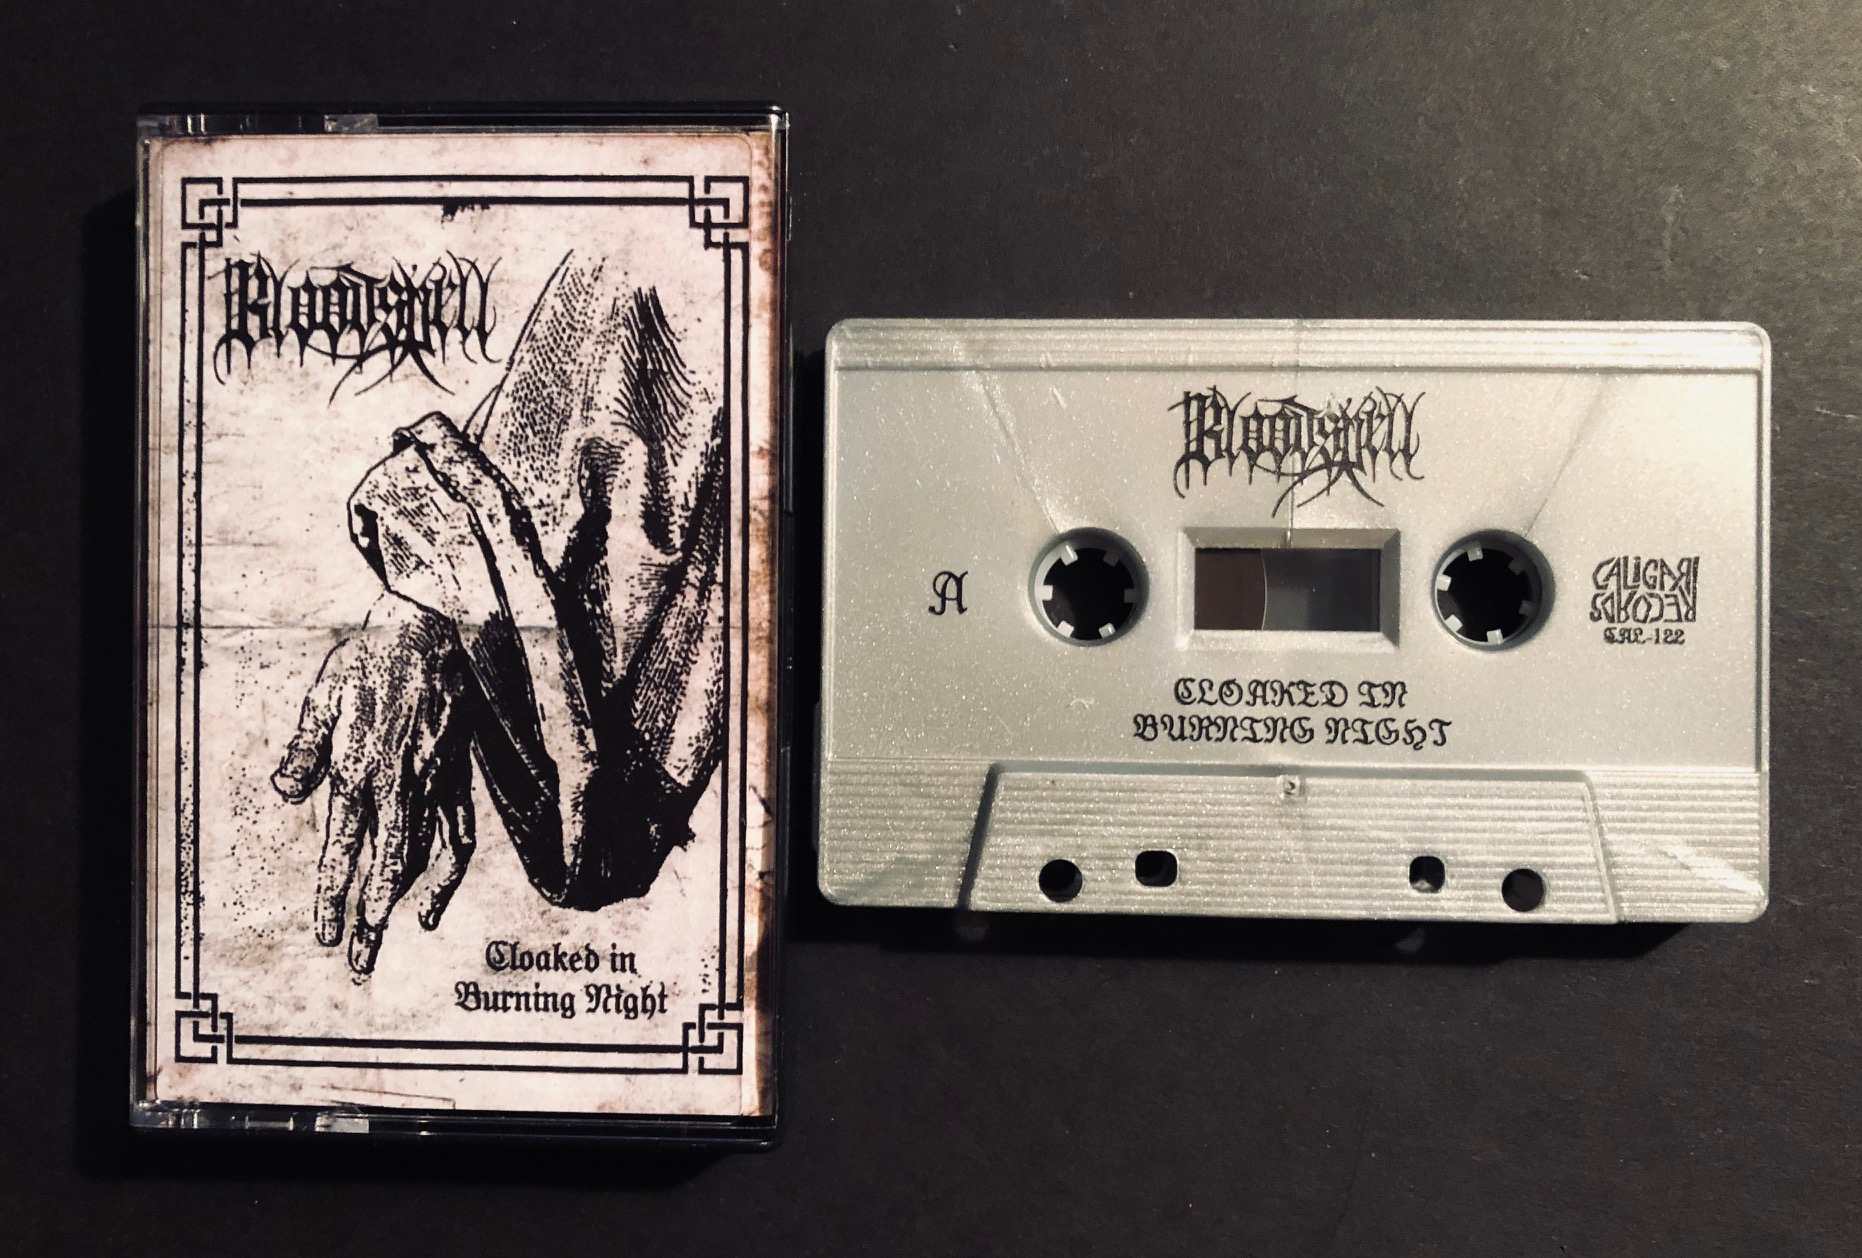 Bloodspell - Cloaked in Night tape